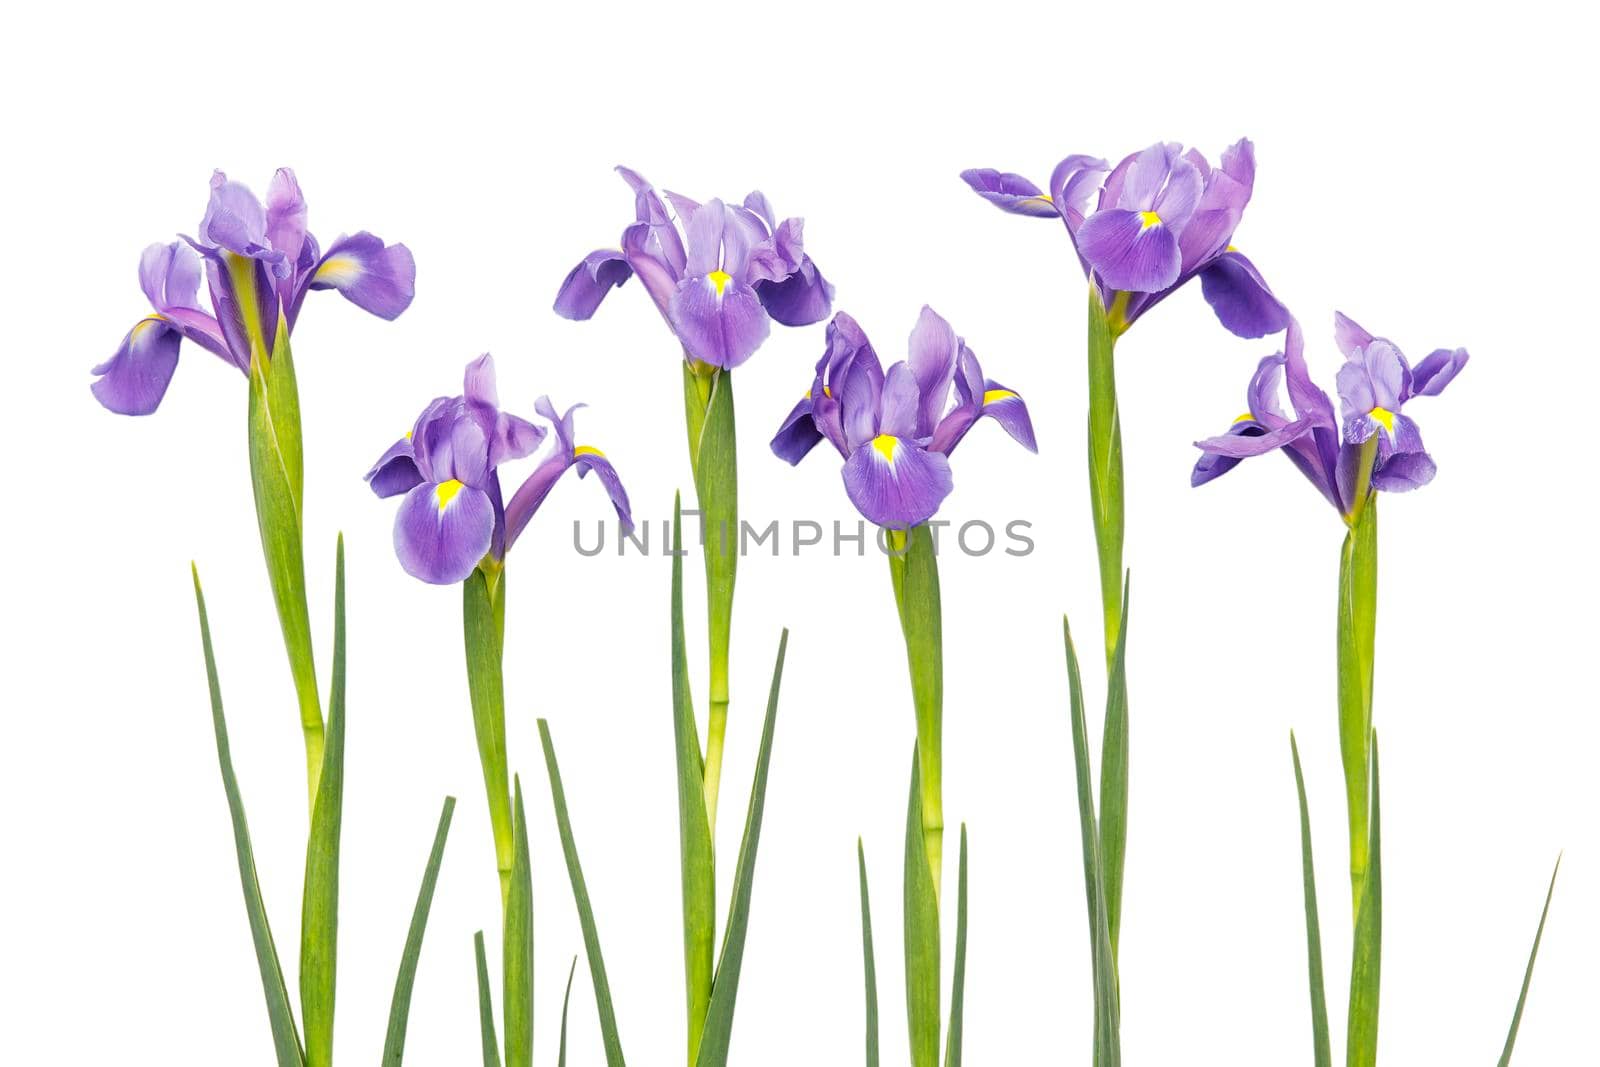 Violet Irises xiphium (Bulbous iris, sibirica) on white background with space for text. Top view, flat lay. Holiday greeting card for Valentine's Day, Woman's Day, Mother's Day, Easter! by elenarostunova